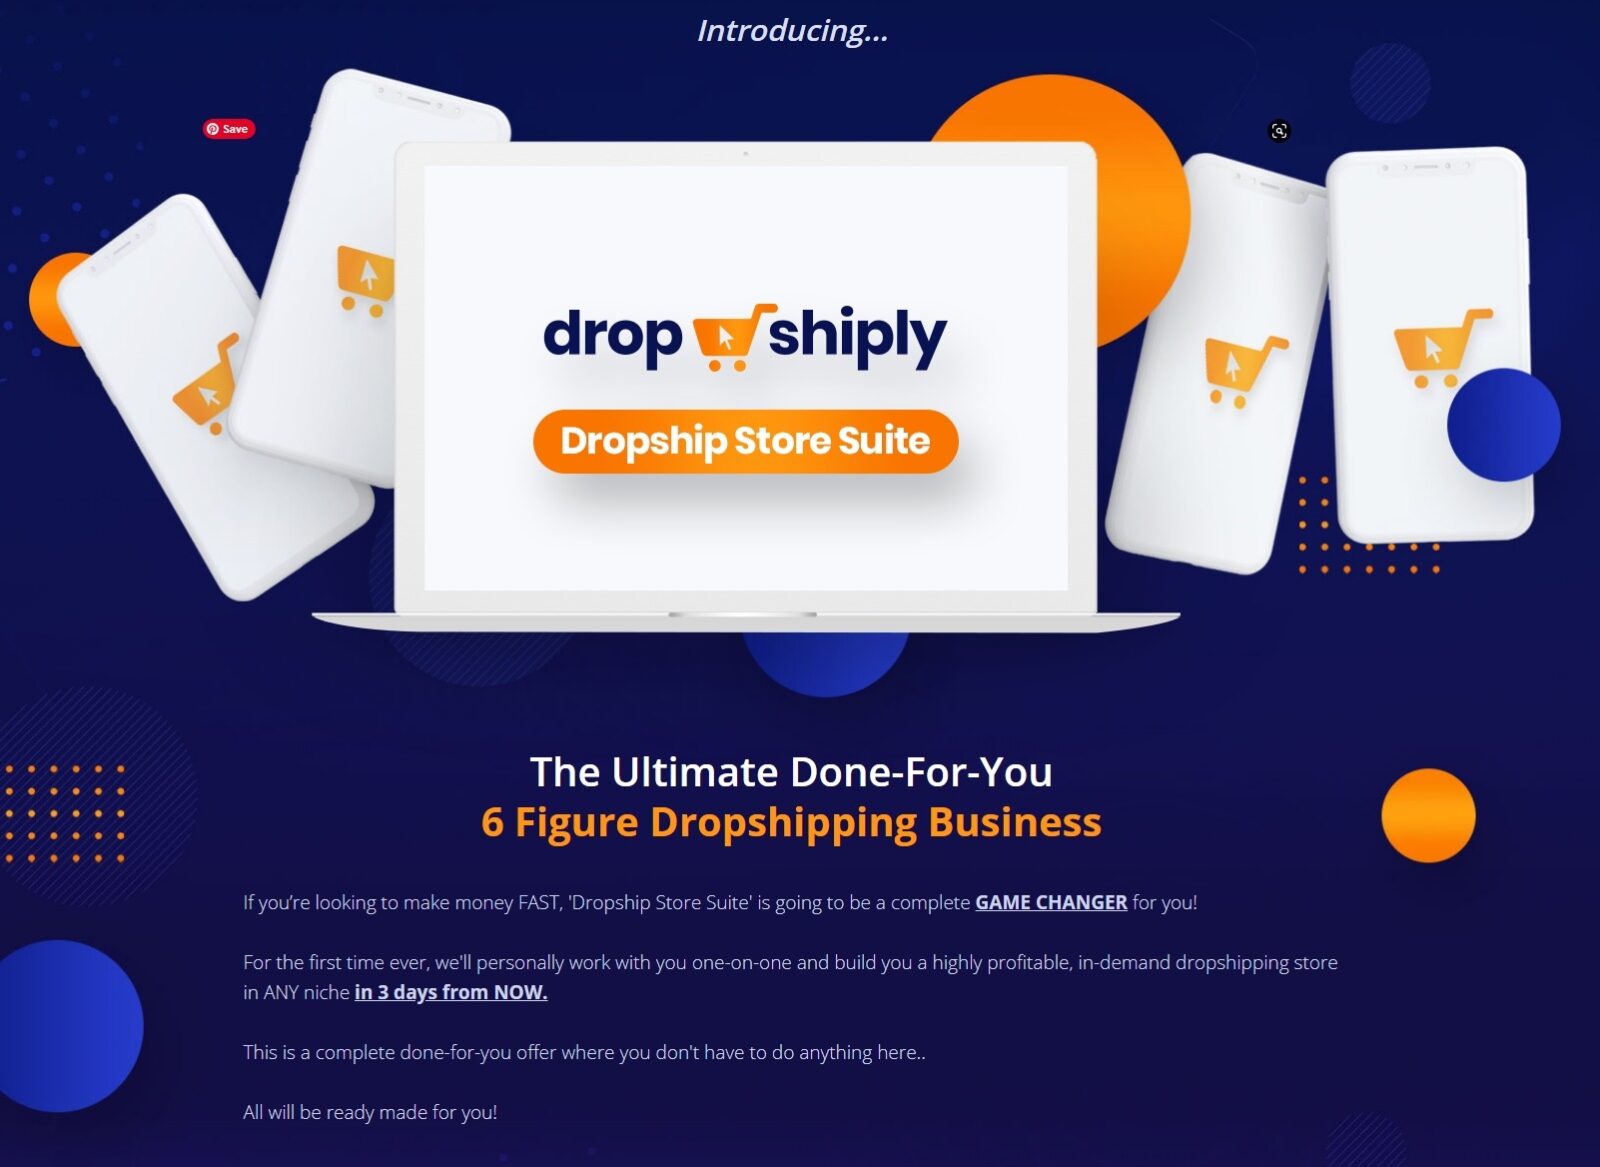 Dropshiply have created over 300+ stores so far that have generated 5-6 figure "pay days" for our clients Completely Done For You Dropshipping Store Setup & Installation Preloaded With 100+ Products.. Just Copy, Paste And PROFIT